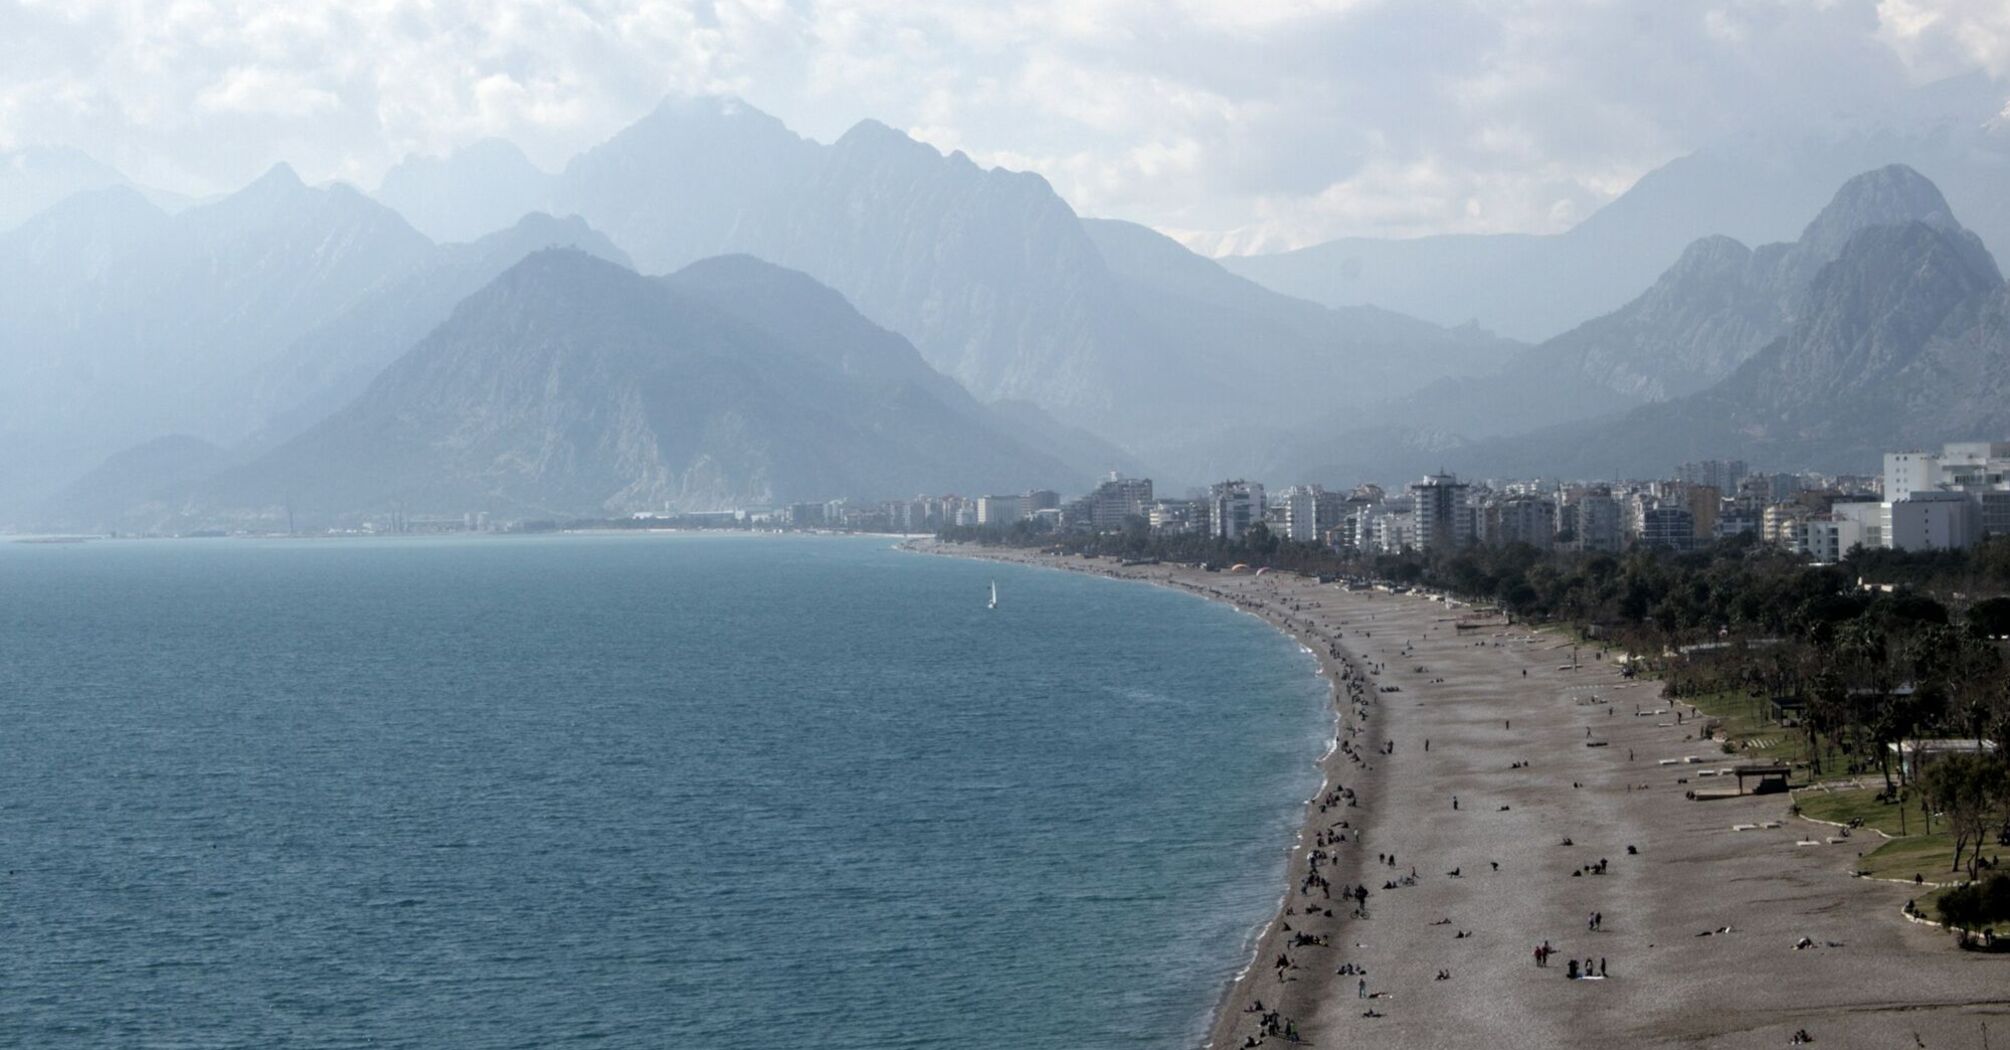 View of Antalya coastline with mountains and beach